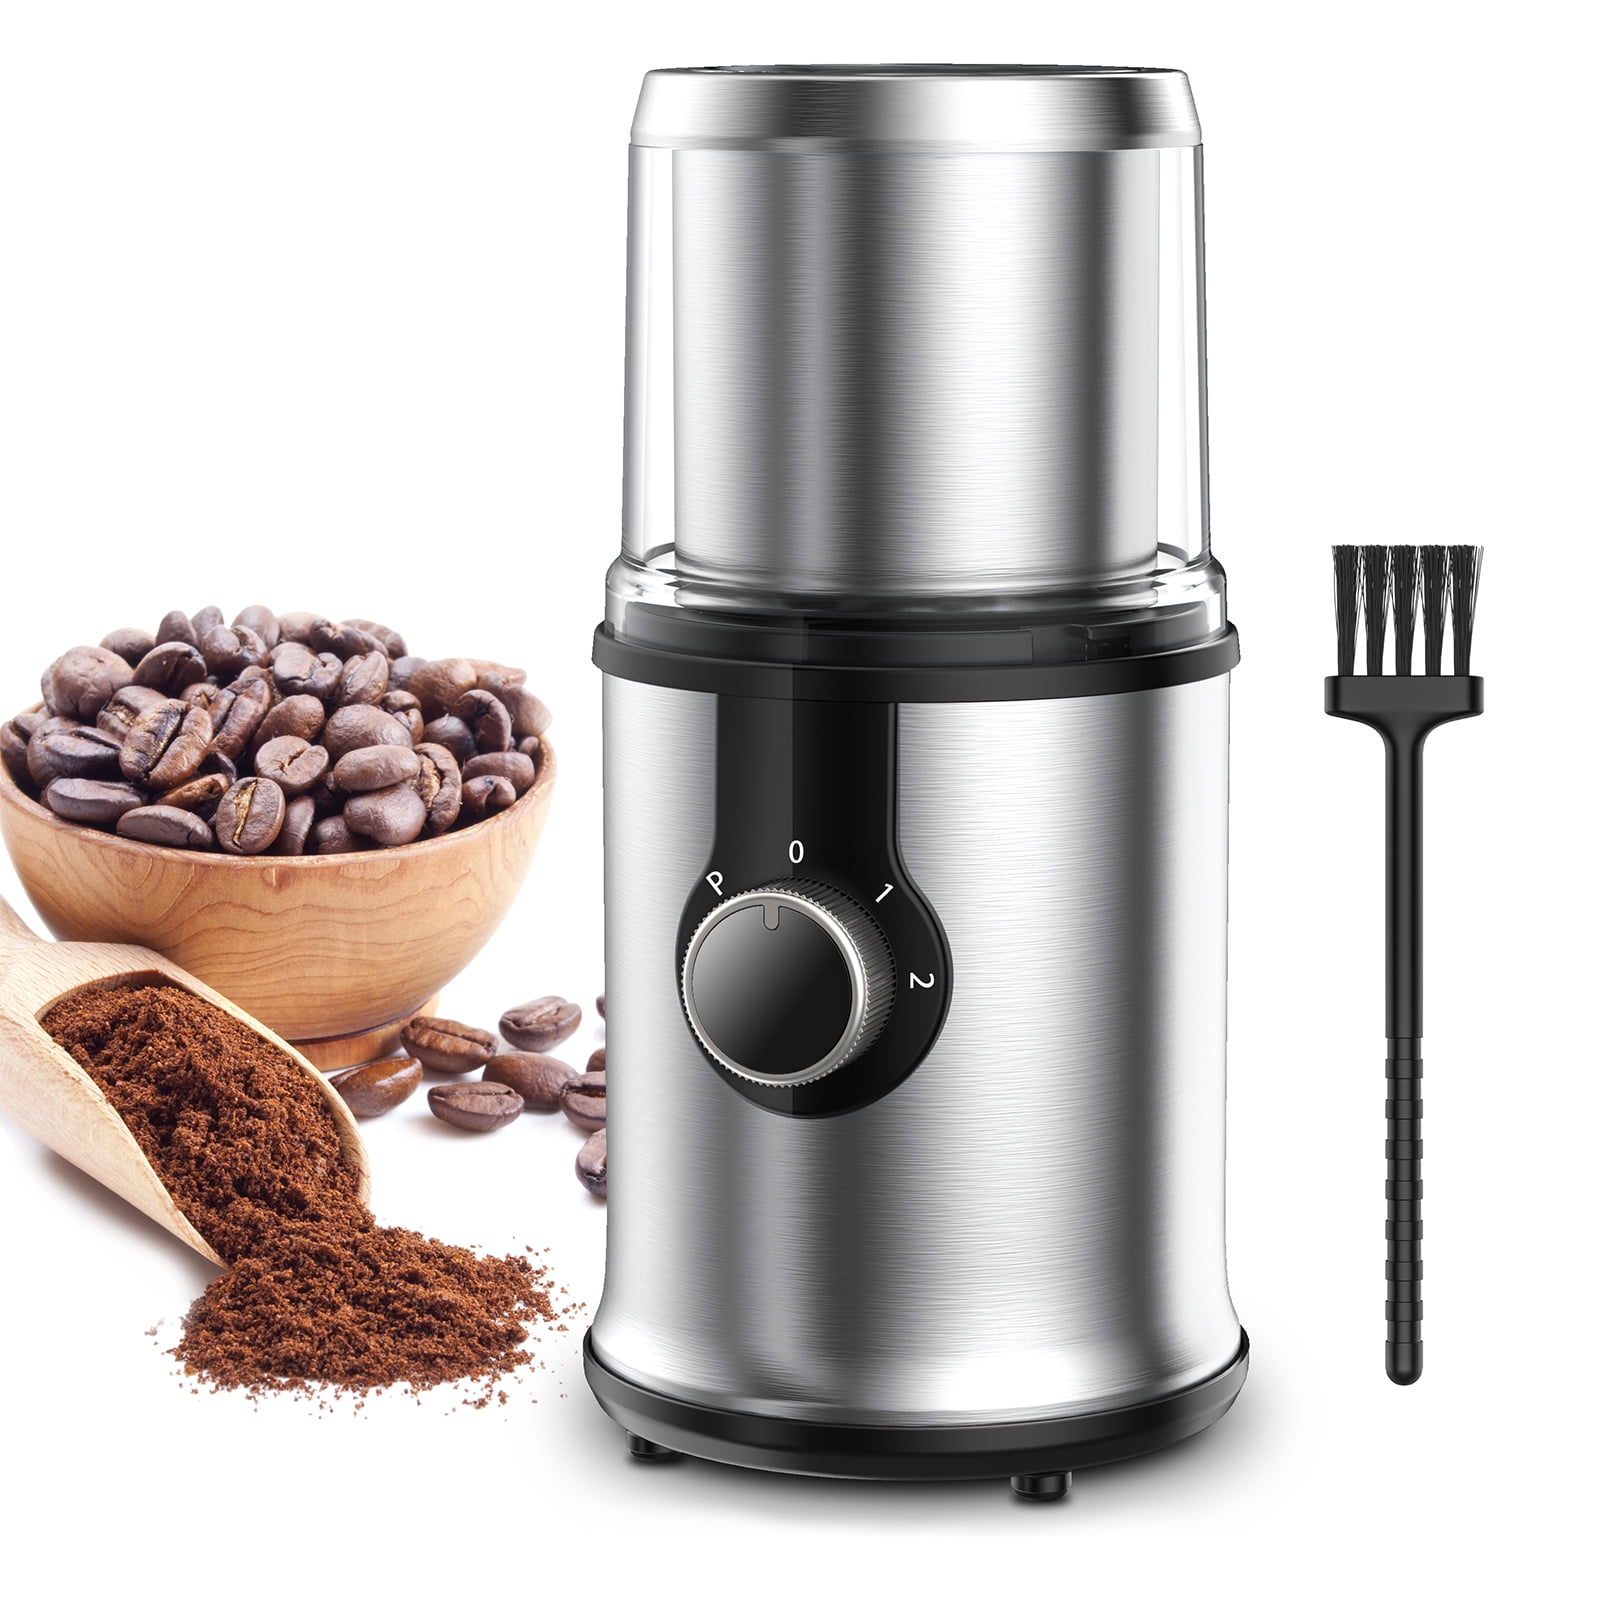 HadinEEon Electric Coffee Grinder, 300W Detachable Coffee and Spice Grinder  with Removable Bowl, 3 Adjustable Modes, 100g/16Cups 